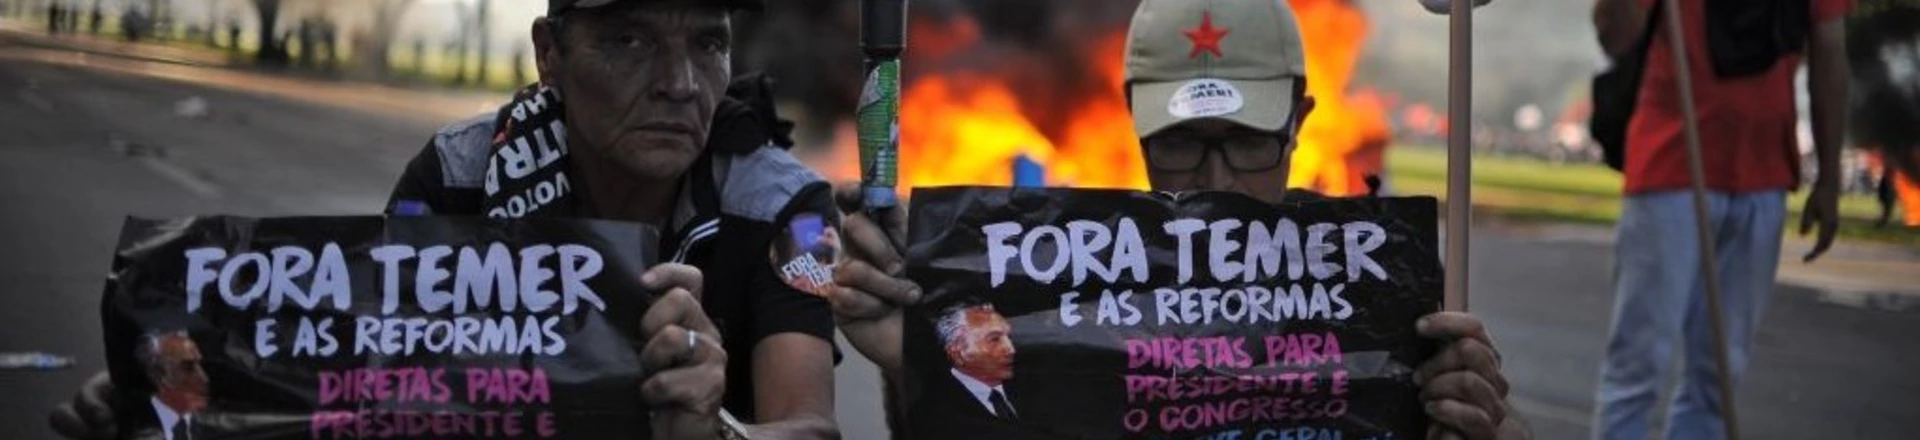 Demonstrators hold banners against Brazilian President Michel temer during clashes in the protest "Occupy Brasilia" against the labor and social security reforms of his government in Brasilia, on May 24, 2017. / AFP PHOTO / Andressa Anholete        (Photo credit should read ANDRESSA ANHOLETE/AFP/Getty Images)